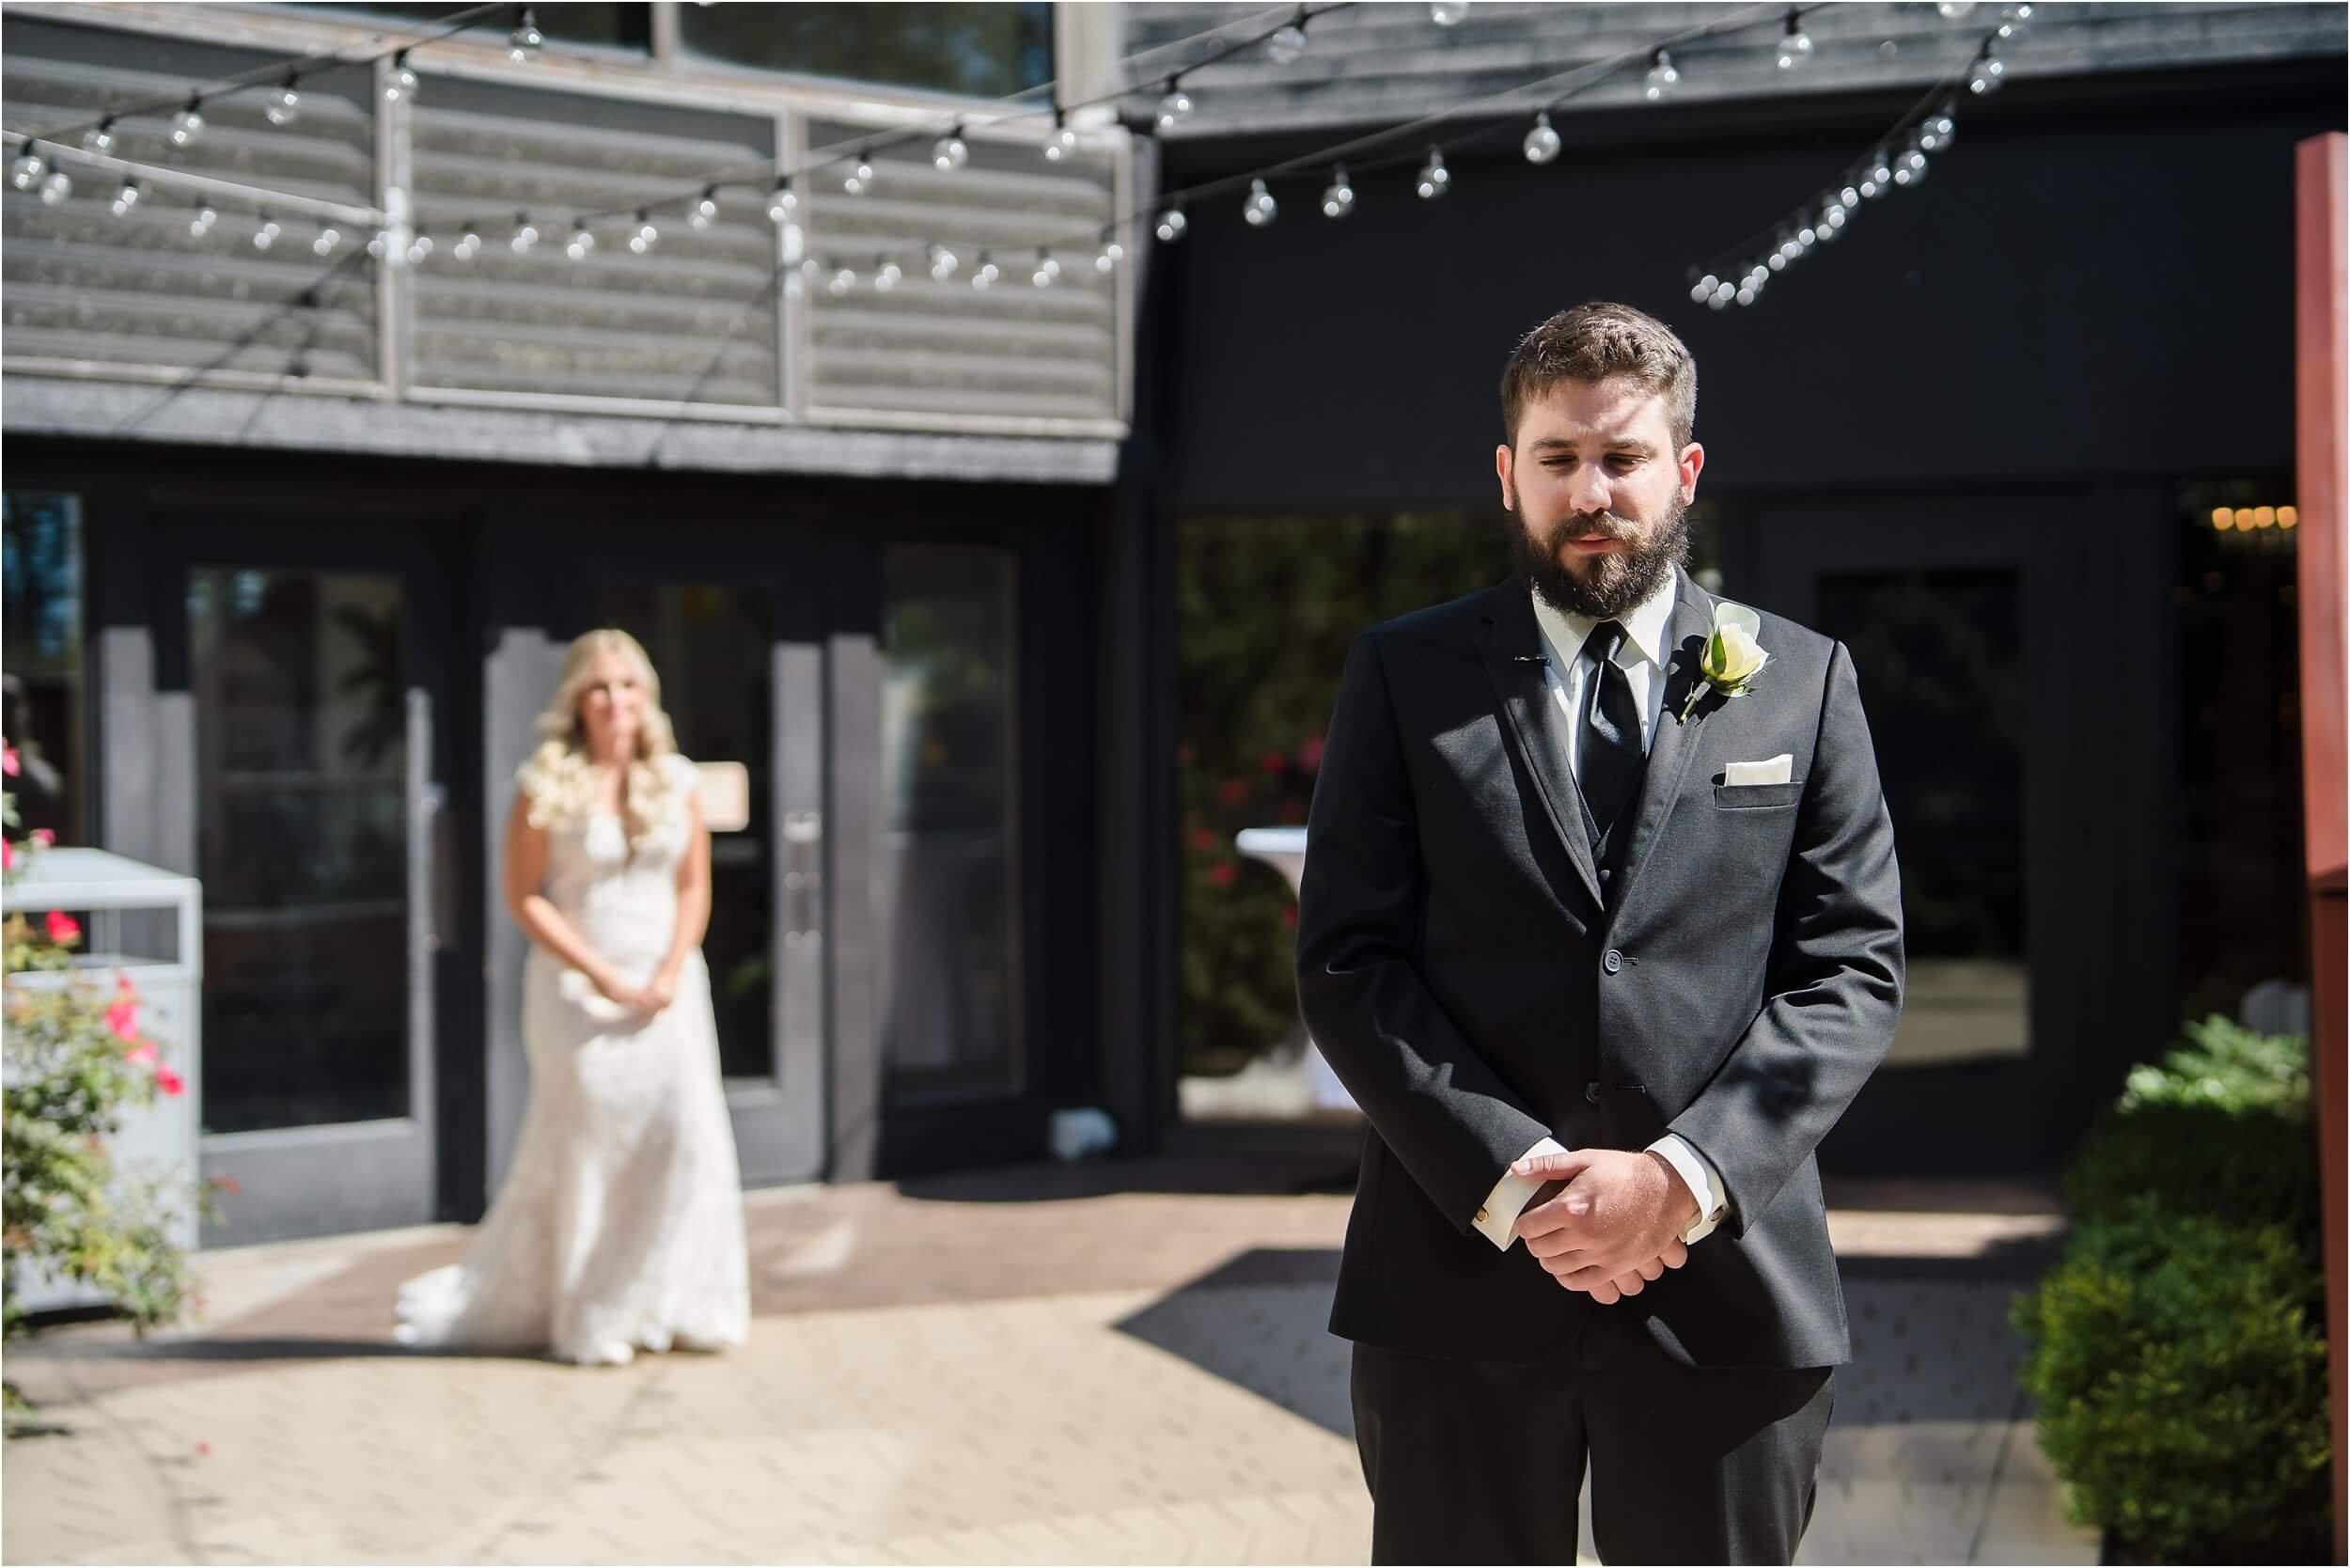  A groom waits patiently for his bride to sneak up on him for their first look in a courtyard.  